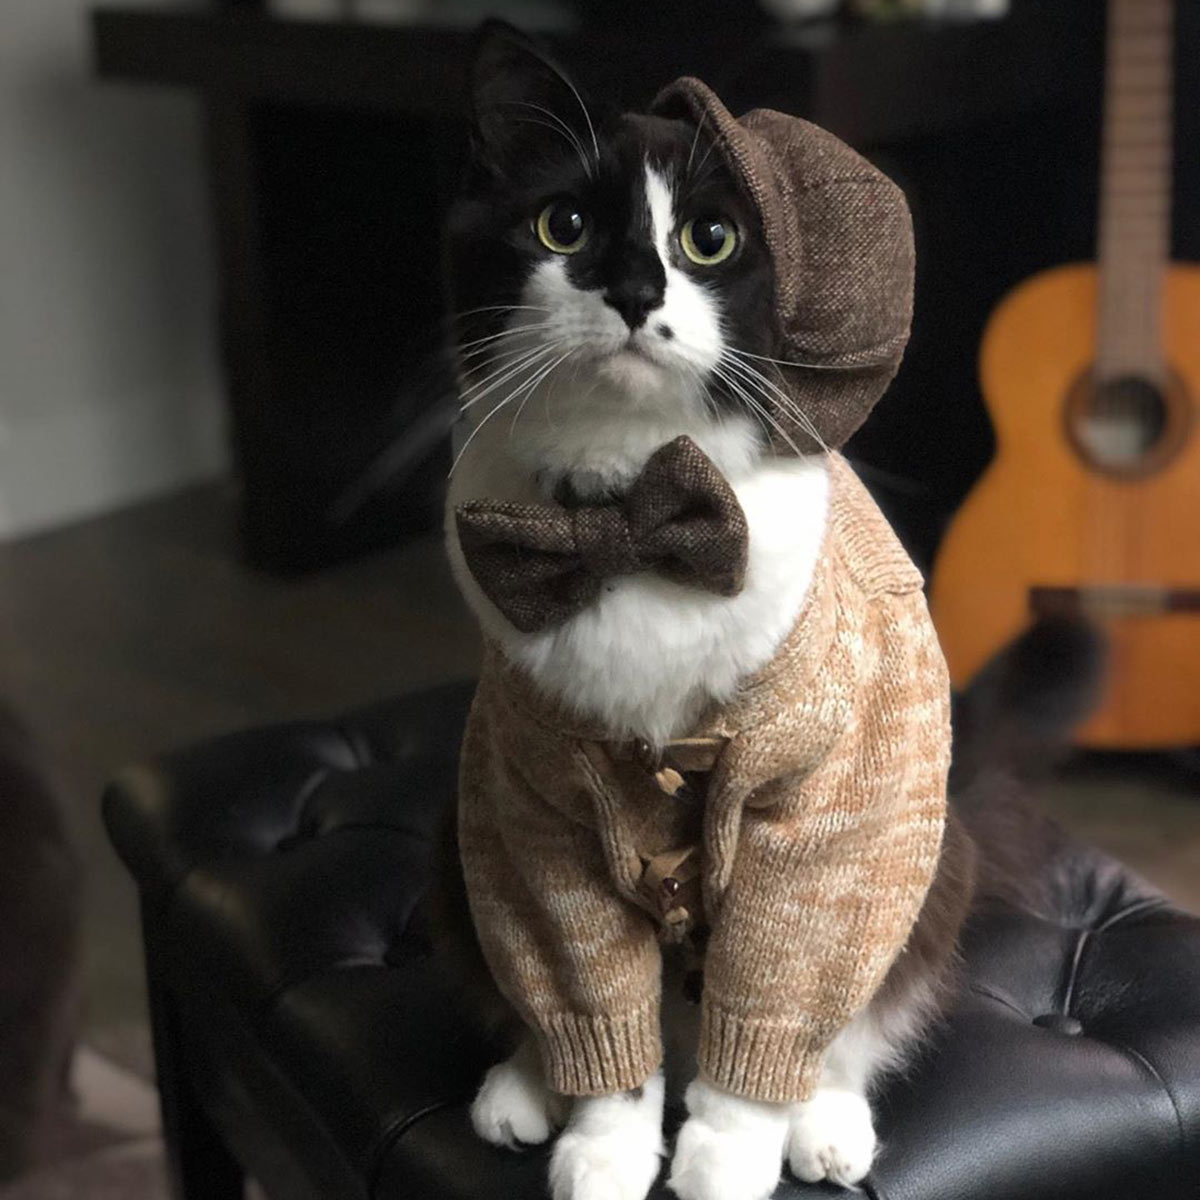 Cats dressed up in shiny jackets | National Dress Your Pet Day ...